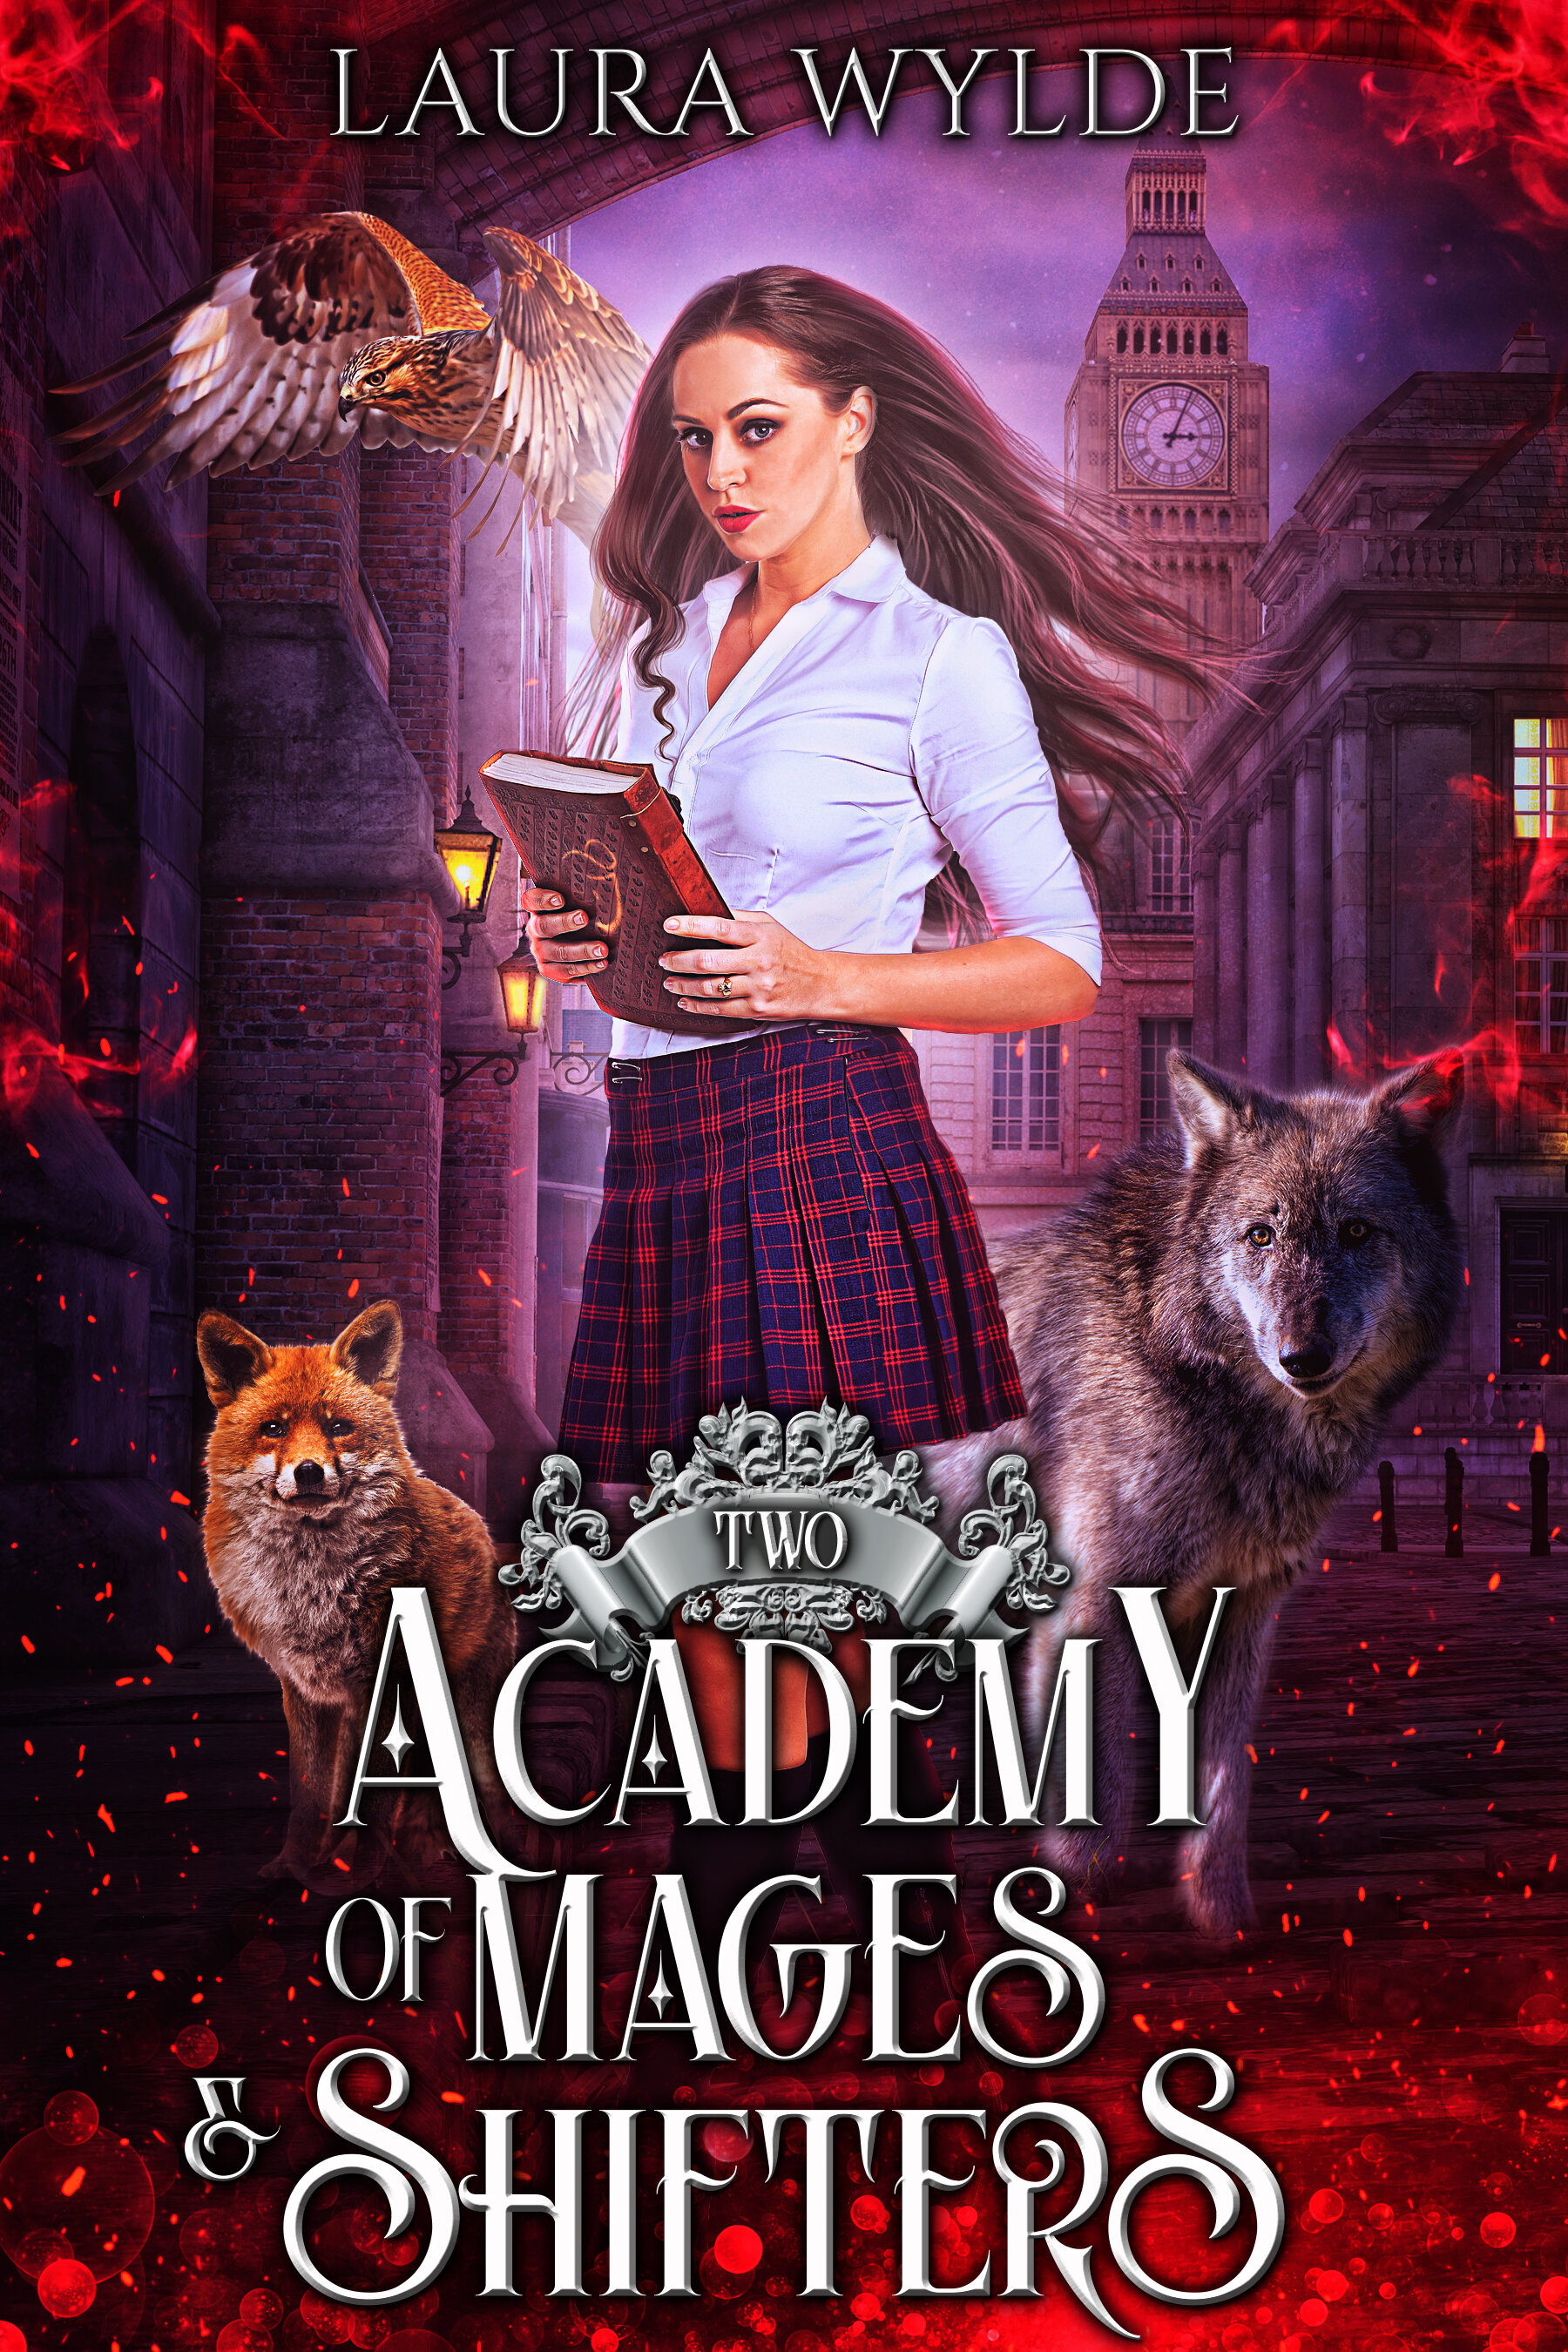 Laura Wylde - Academy of Mages & Shifters book 2 v1.jpg